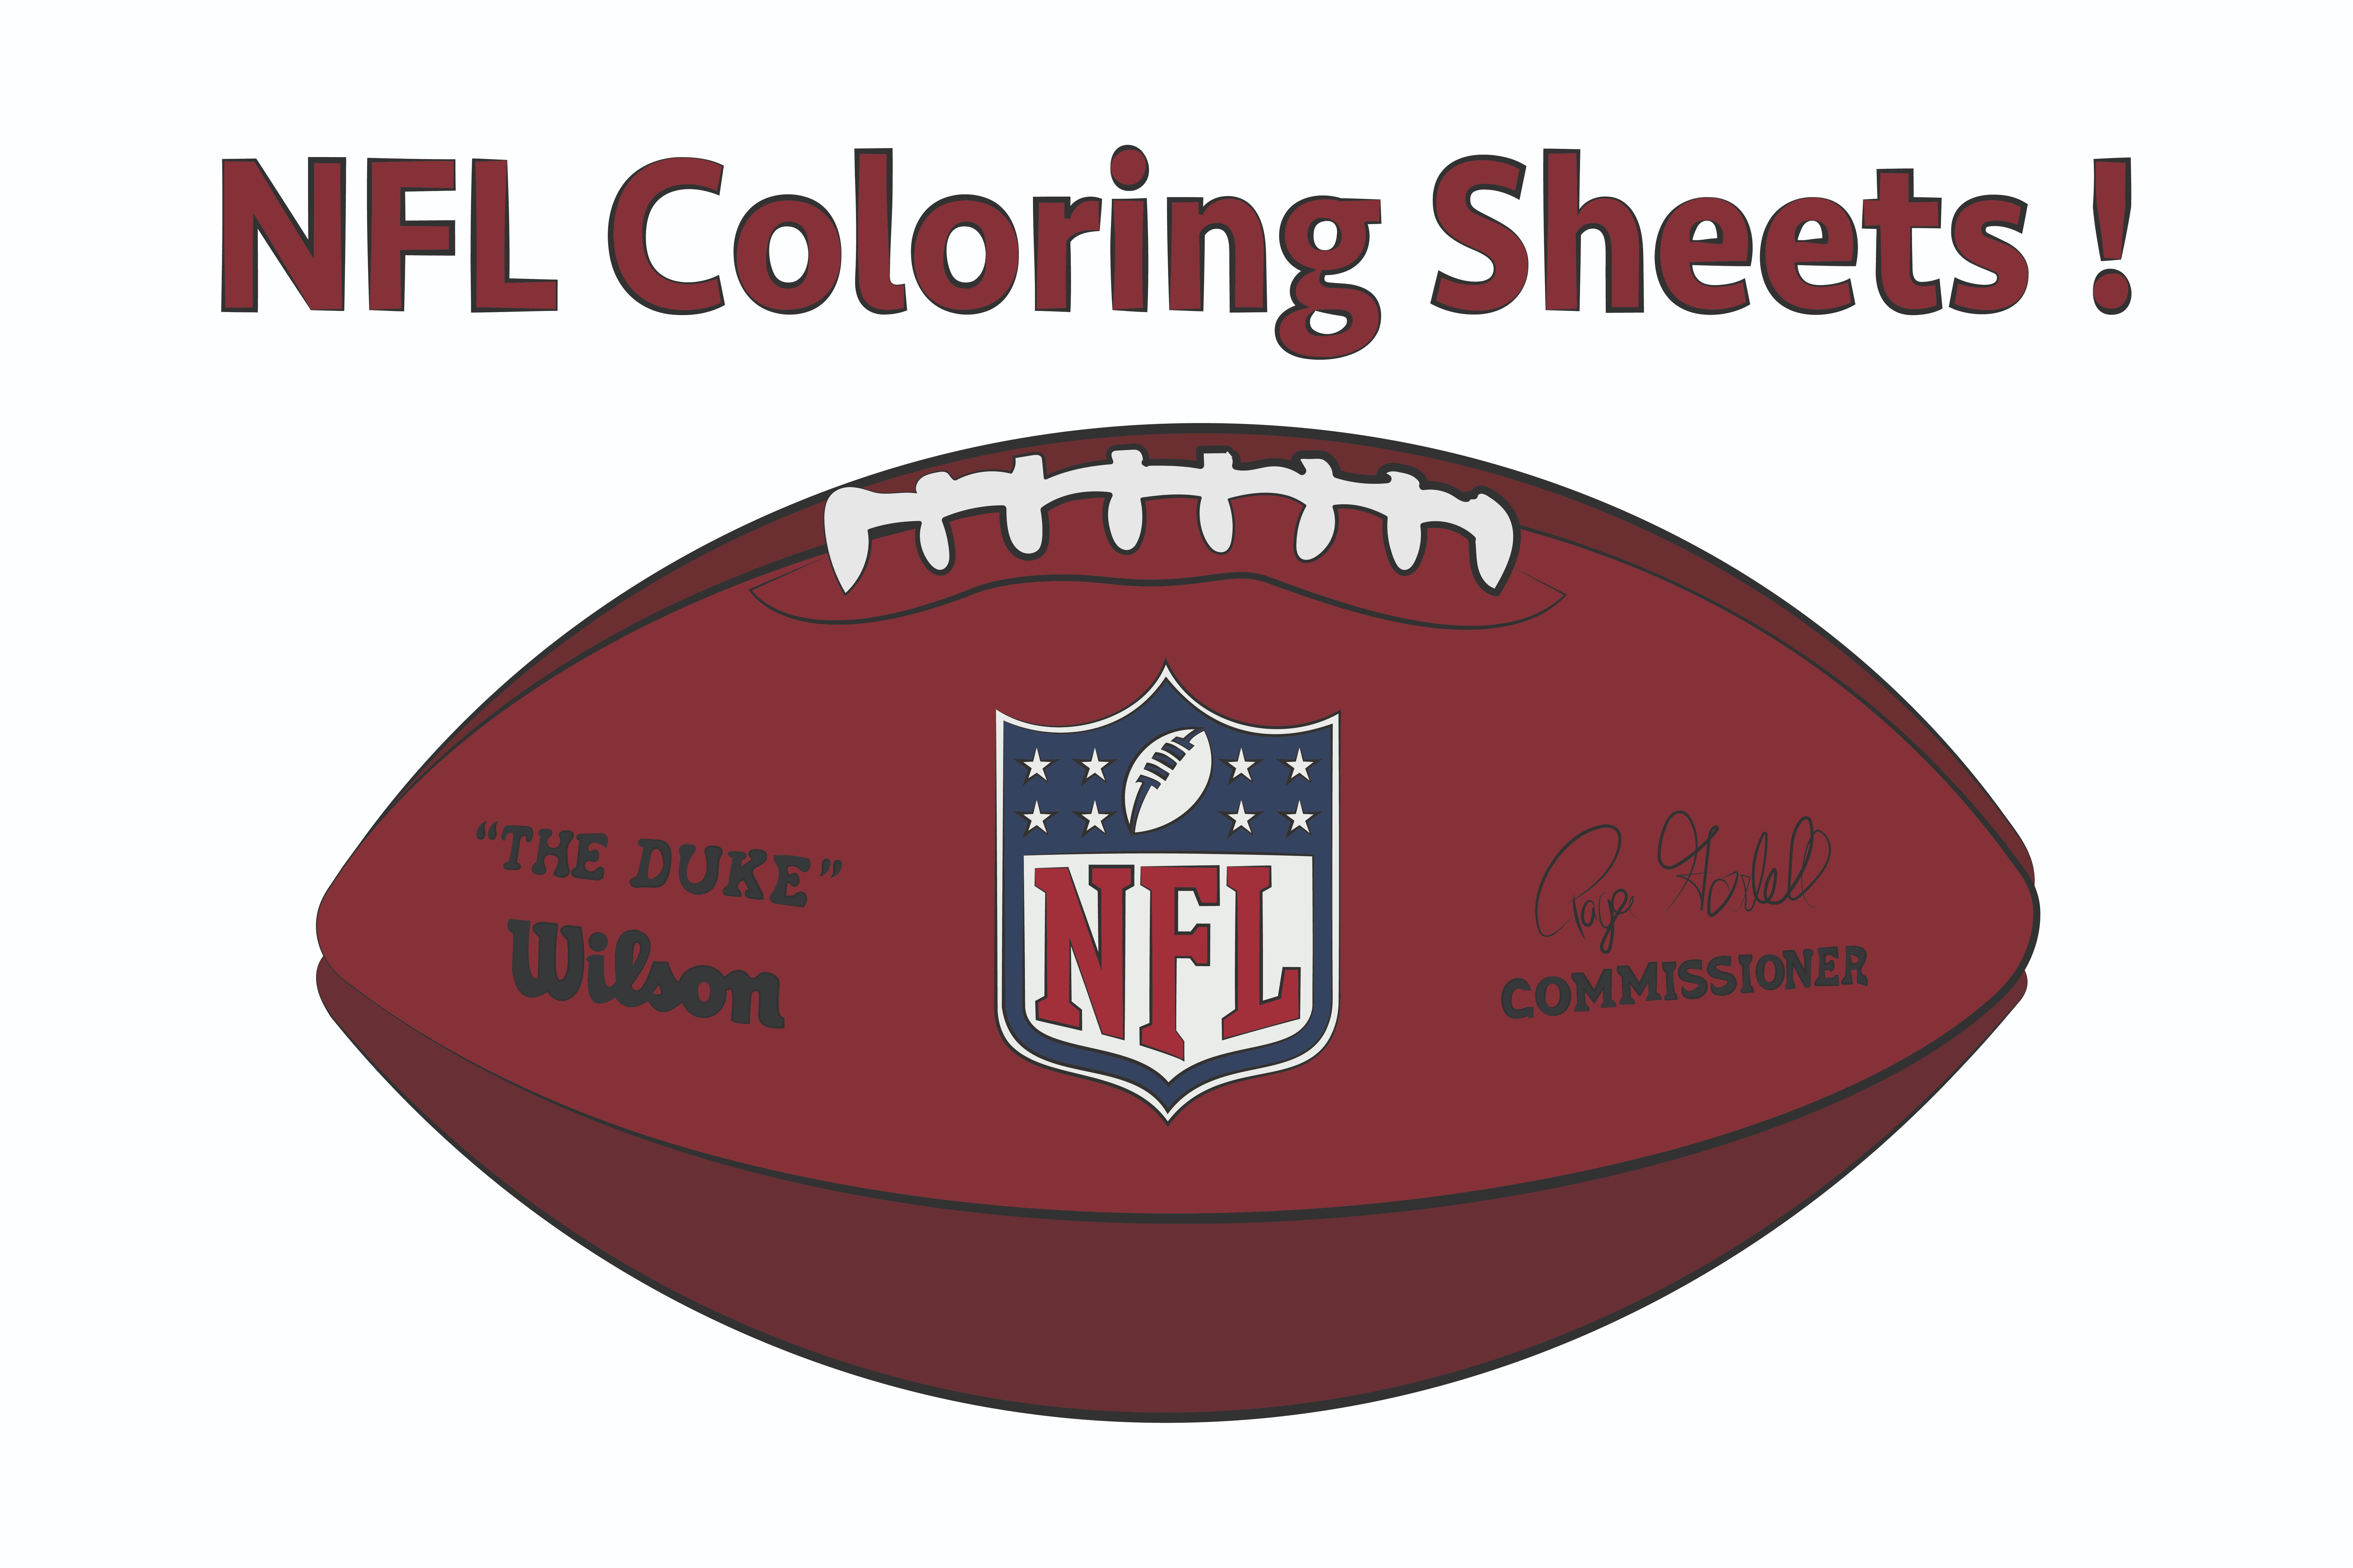 Nfl coloring pages